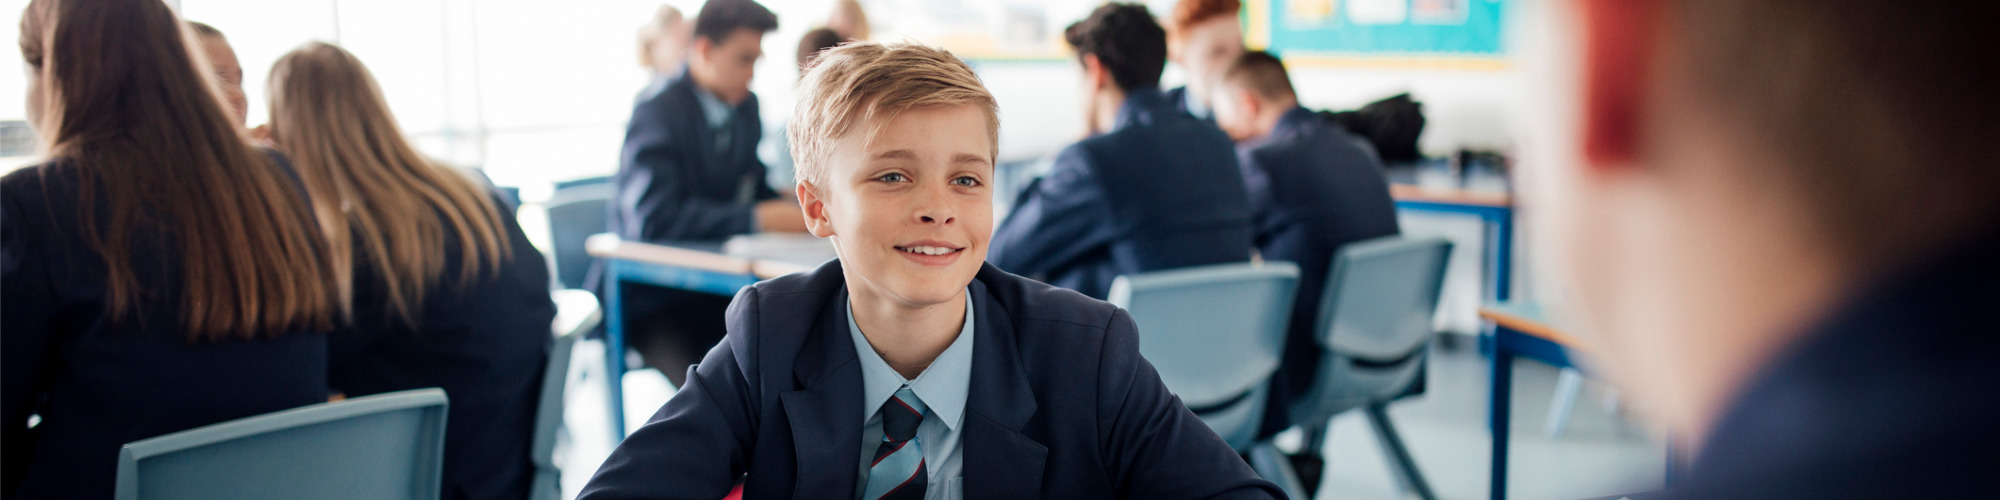 Safeguarding in Schools - The Latest Guidance